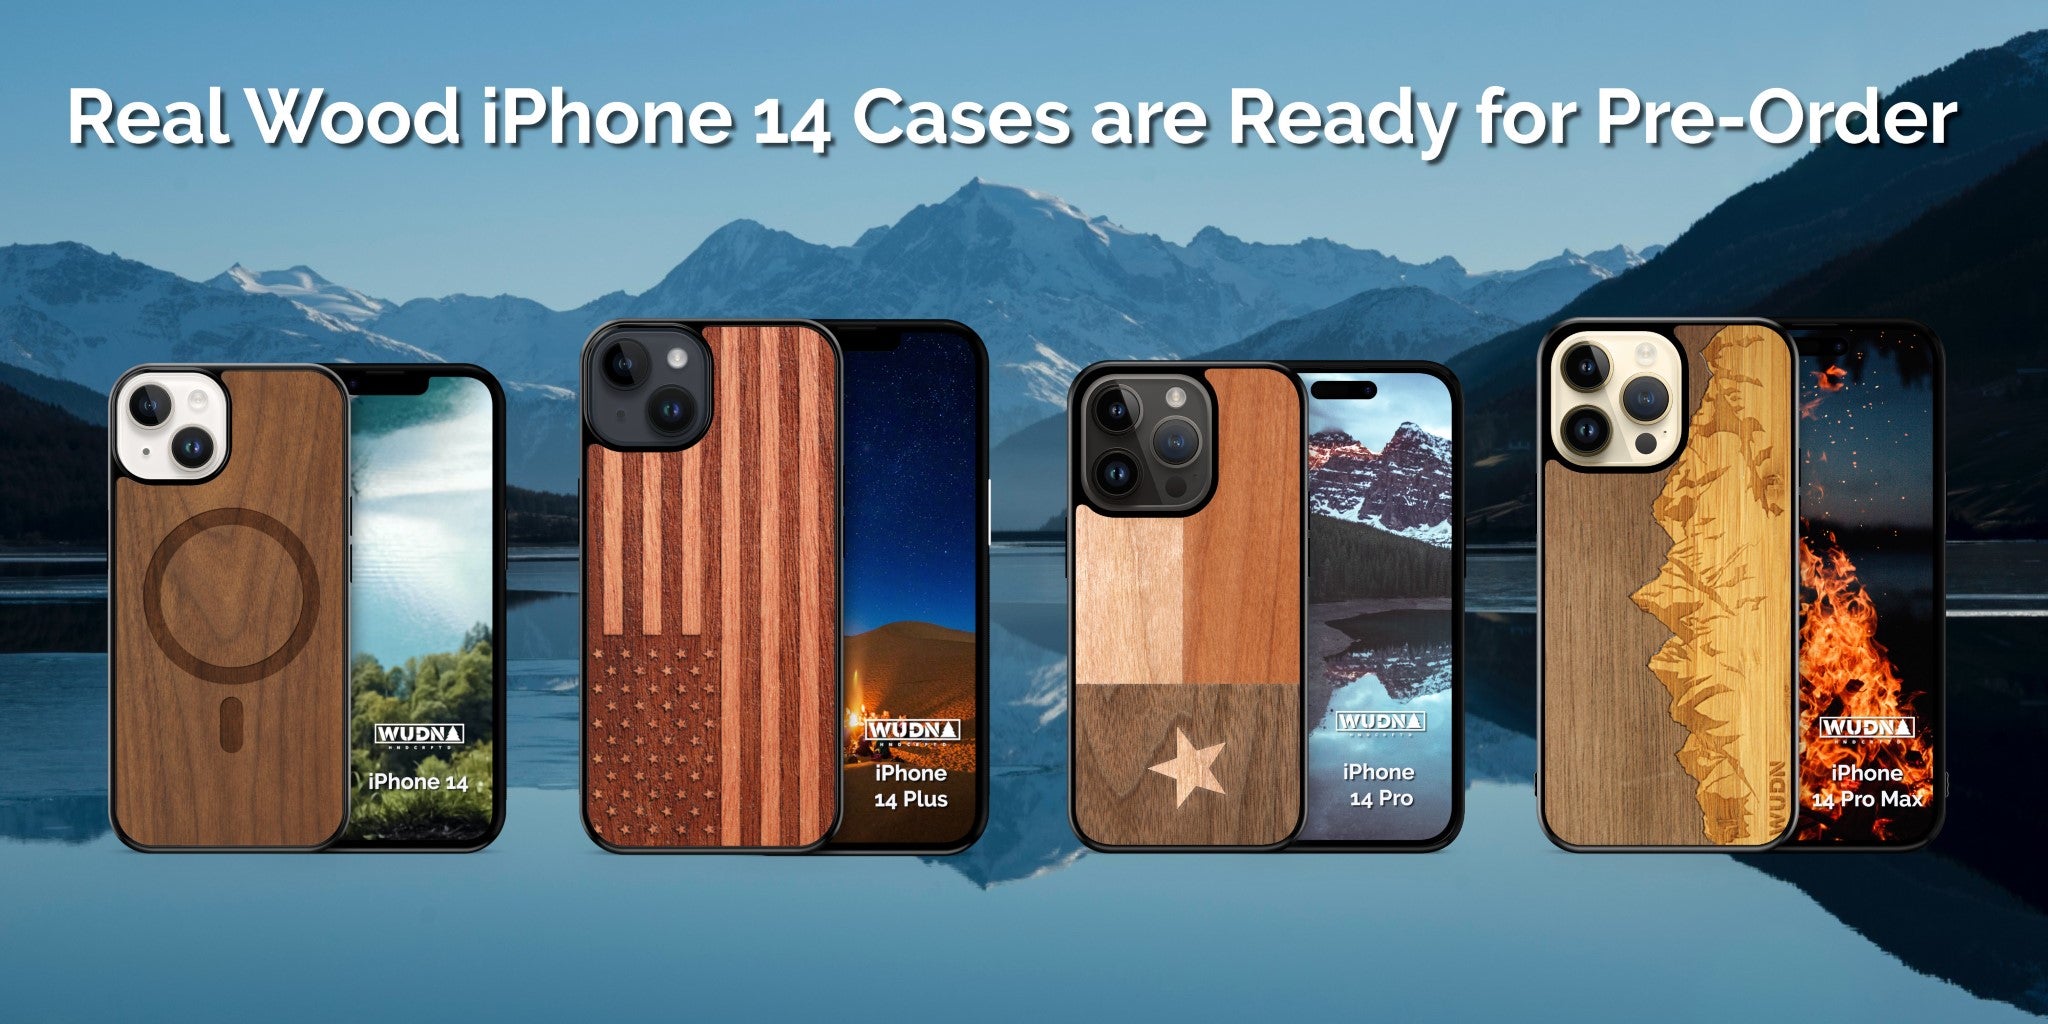 Real Wood iPhone 14 Cases are Ready for Pre-Order